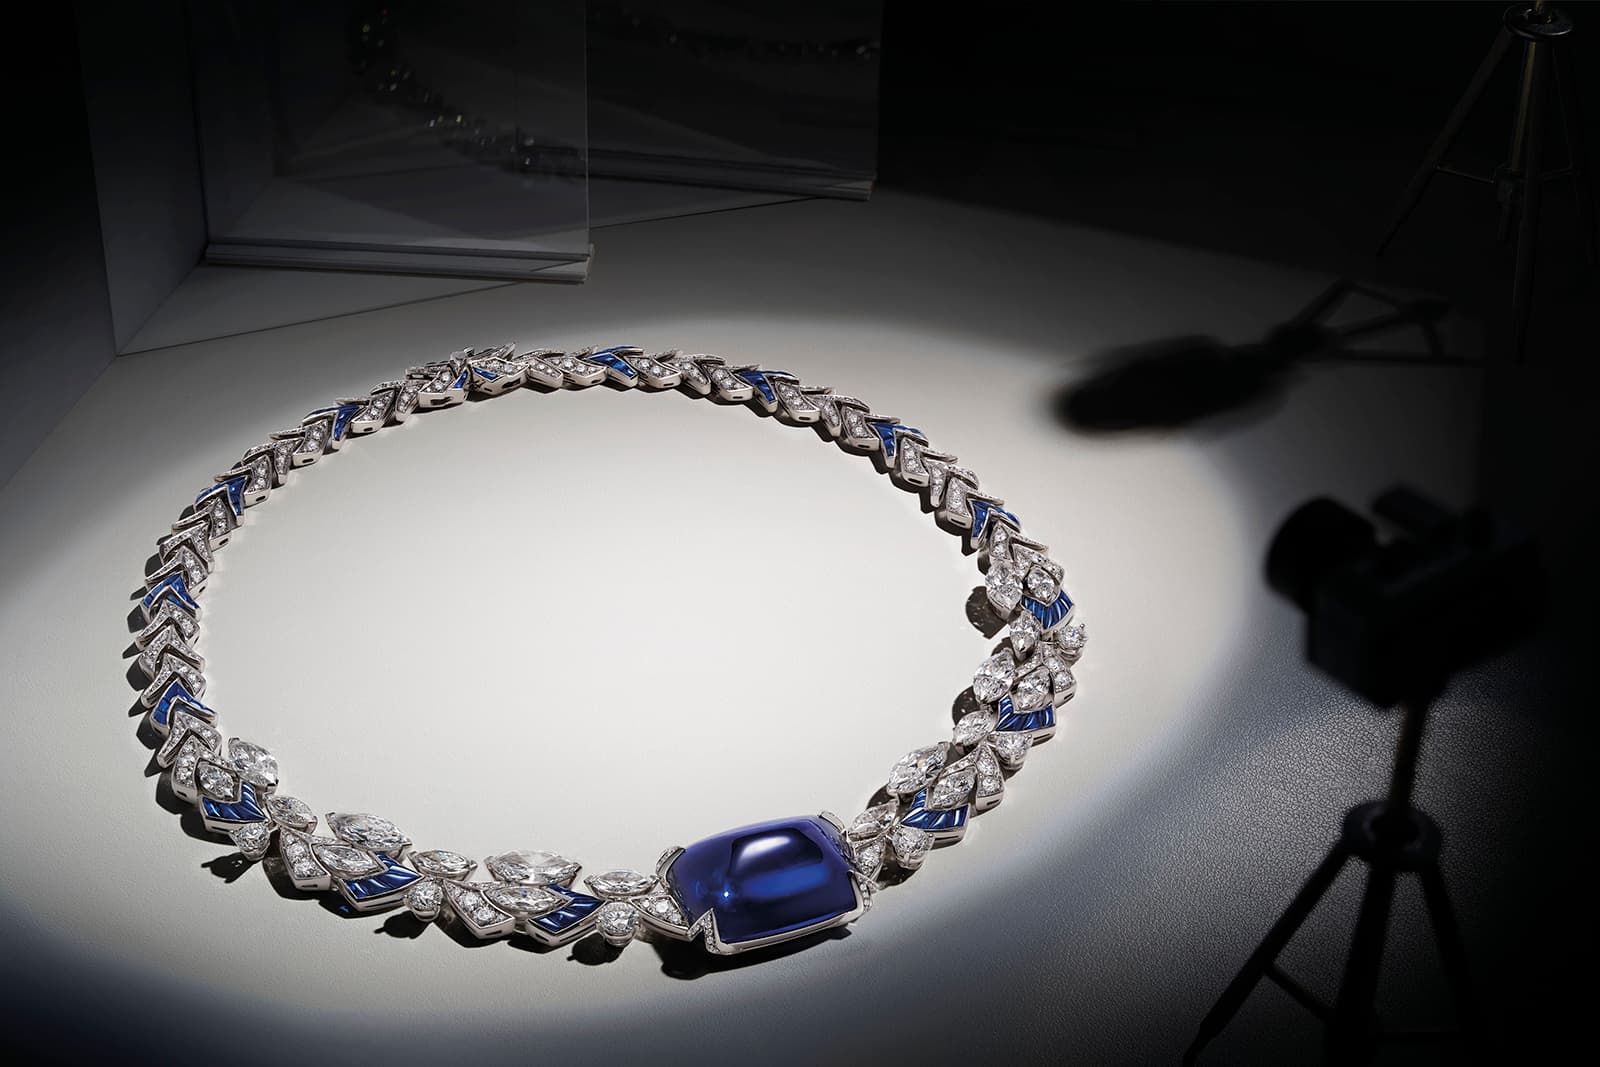 Bvlgari 'Cinemagia' necklace with 70.22 cts cabochon sapphire, 11.36 cts buff-top sapphires and 28.16 cts of diamonds